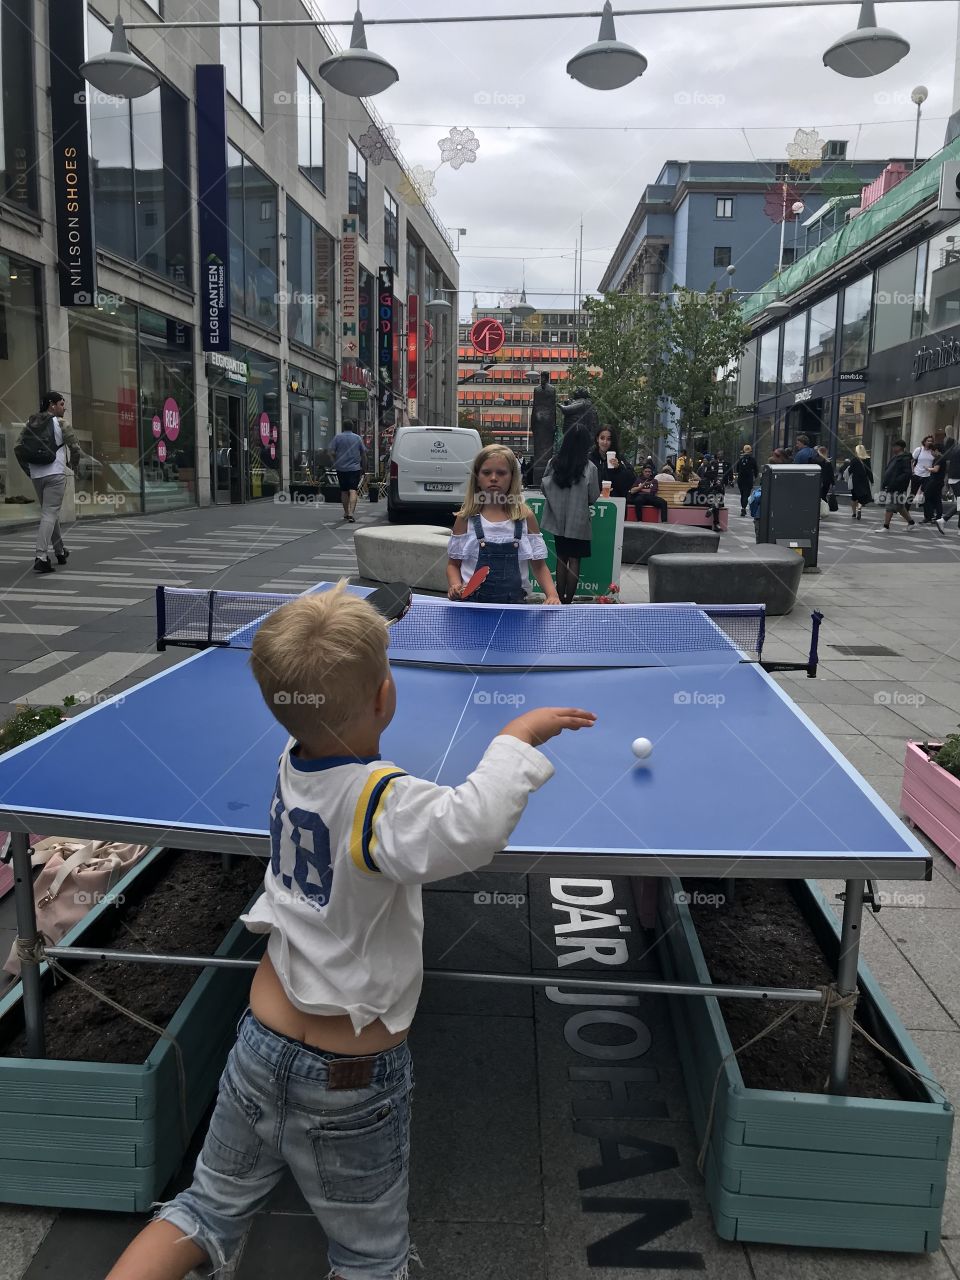 Table tennis in Stockholm